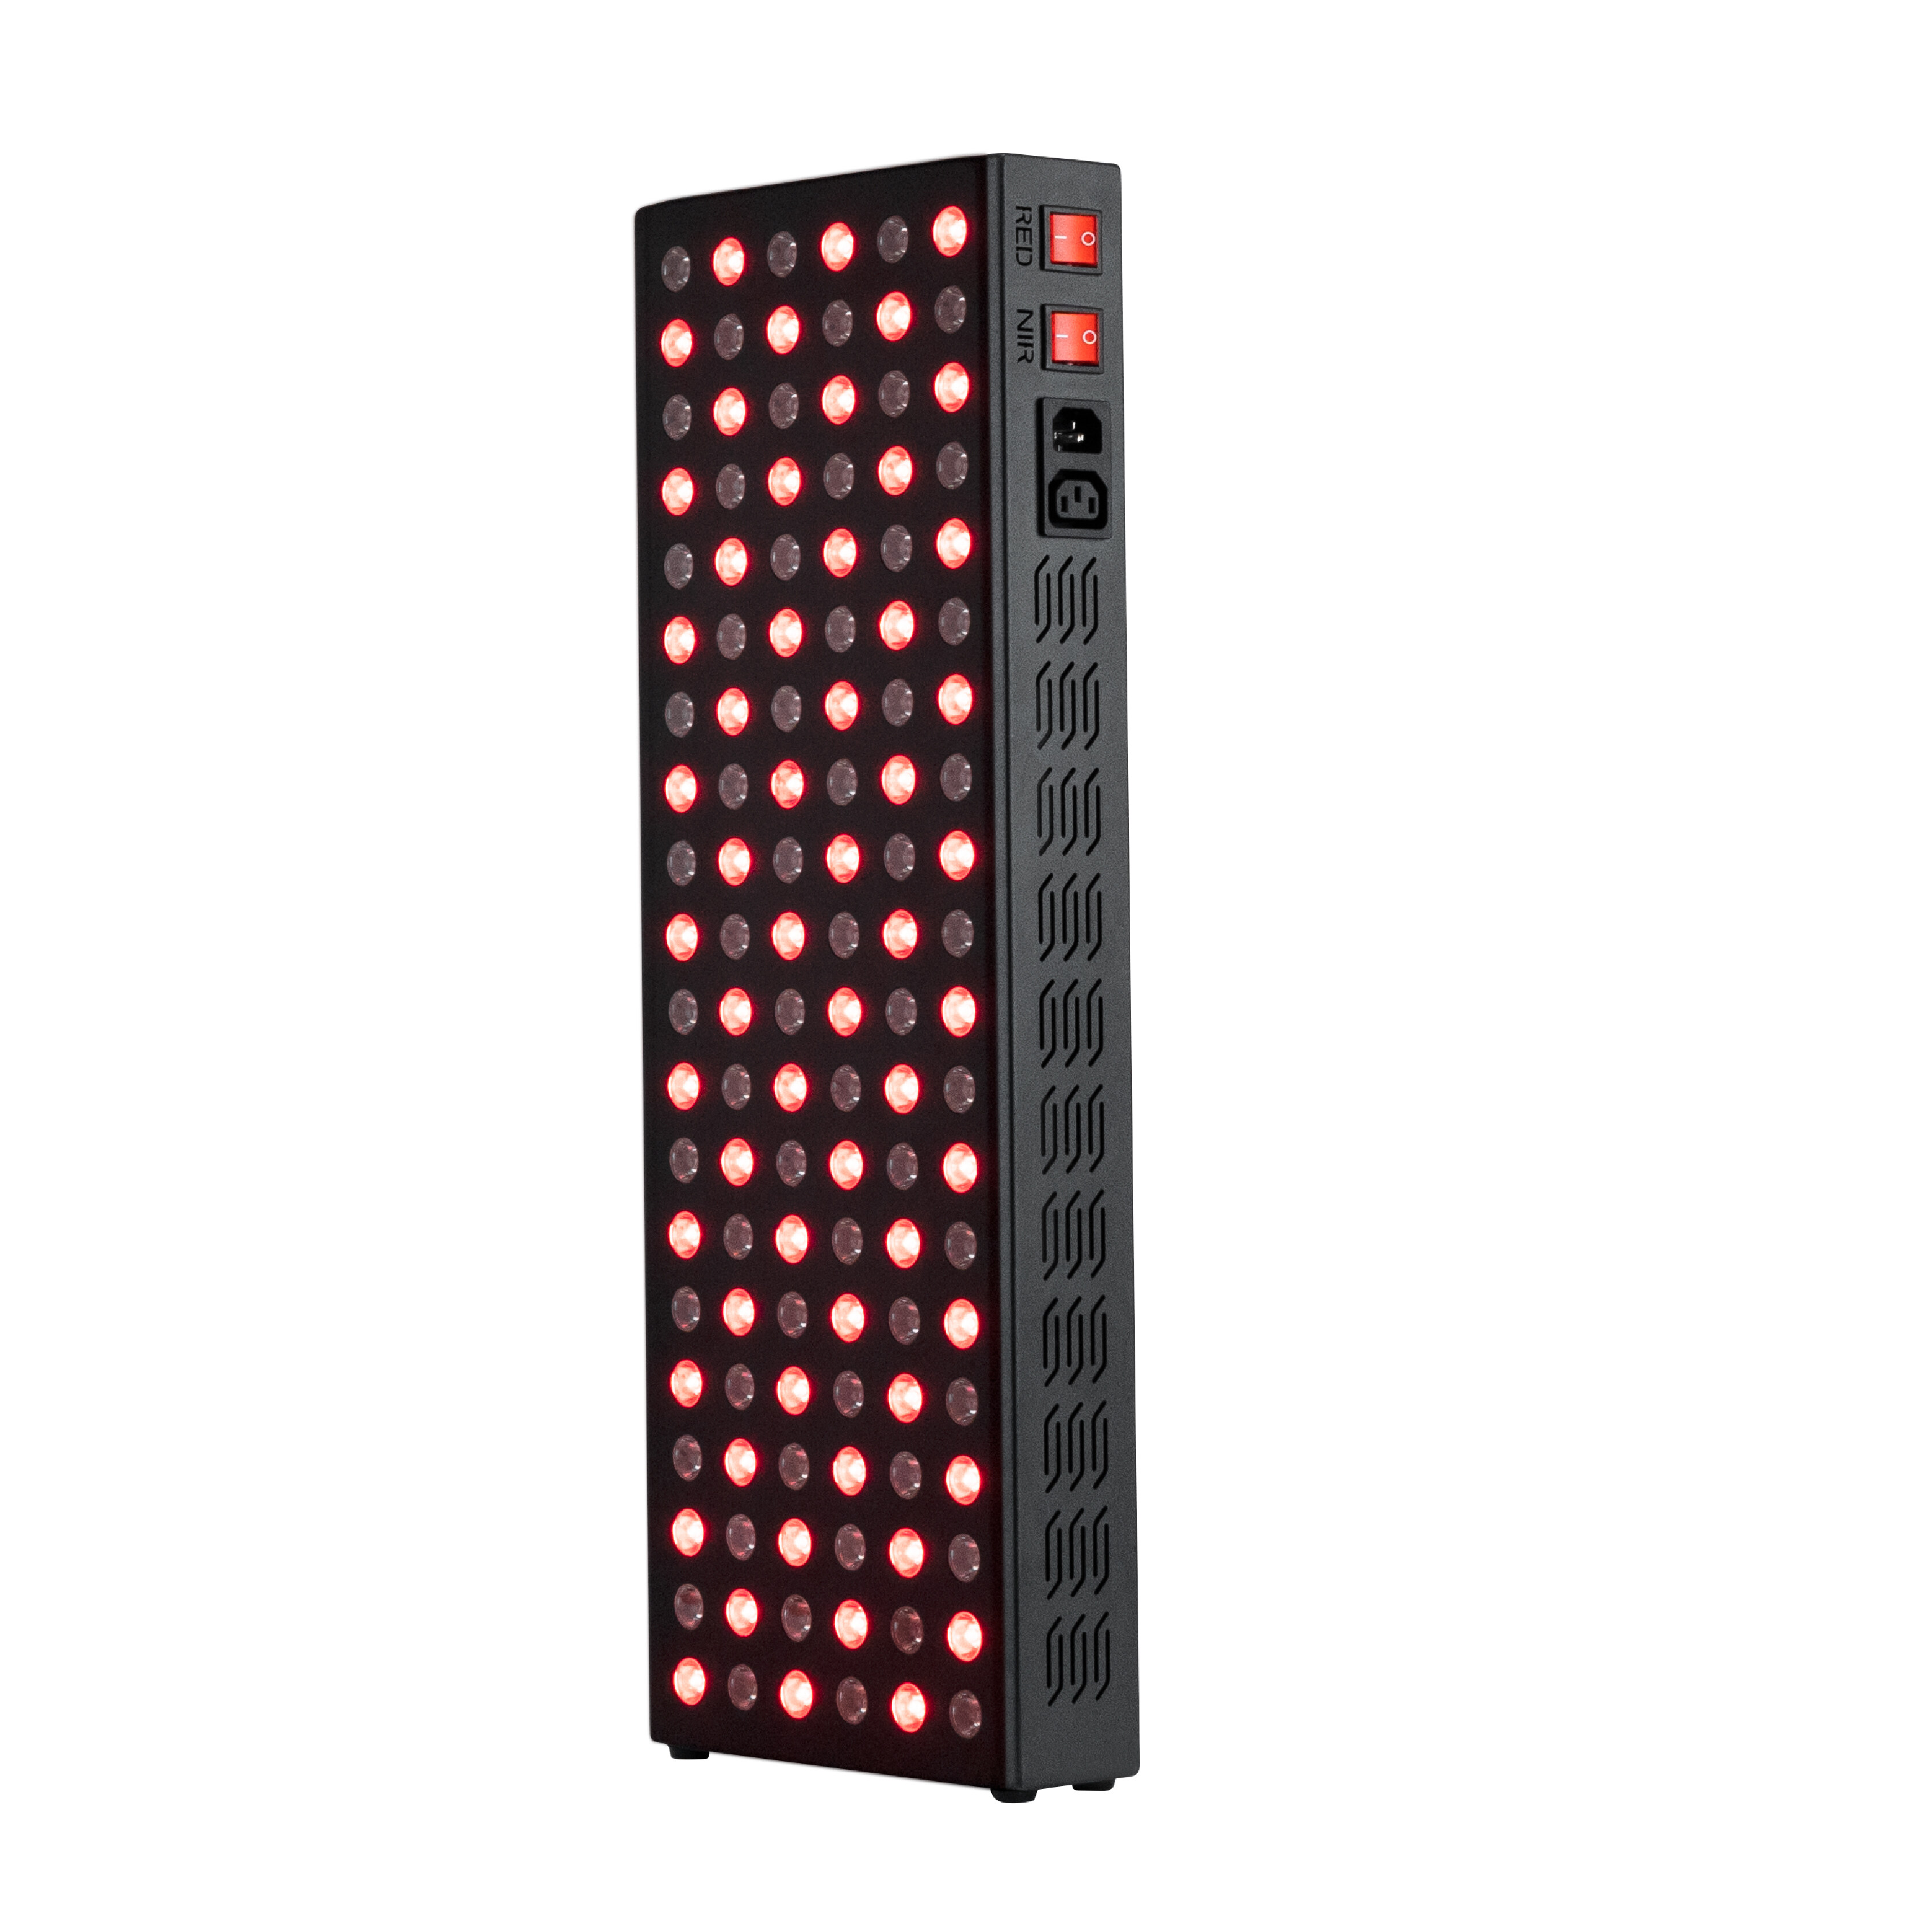 red light therapy lamp for sale, red light therapy lamps for sale, red light therapy lamp